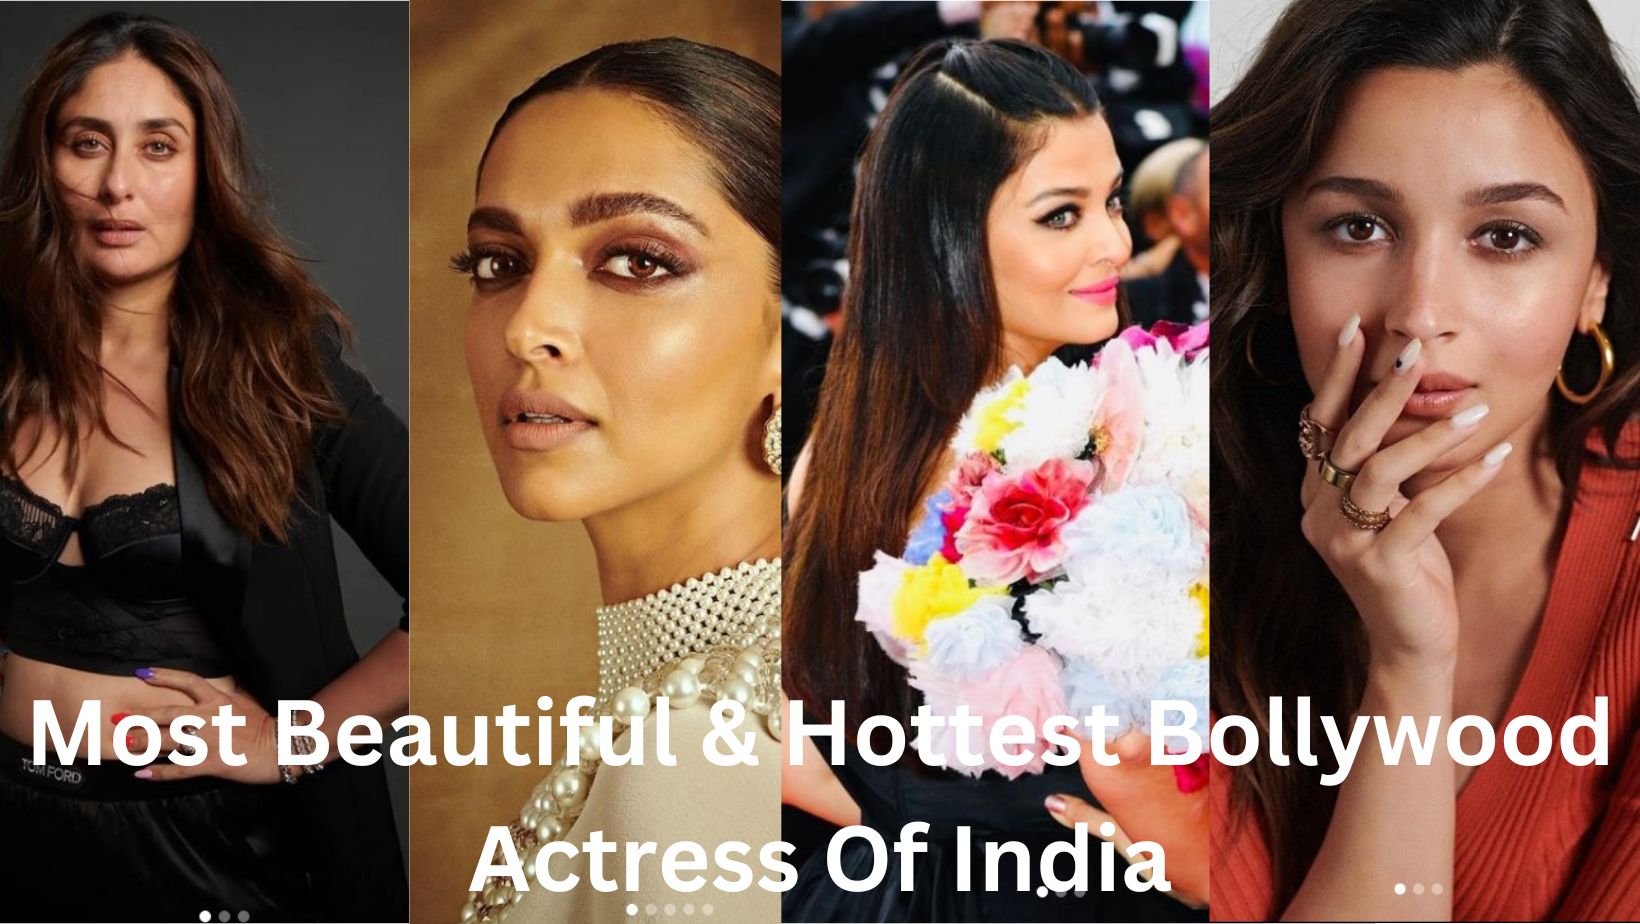 Top 25 Most Beautiful & Hottest Bollywood Actress of India